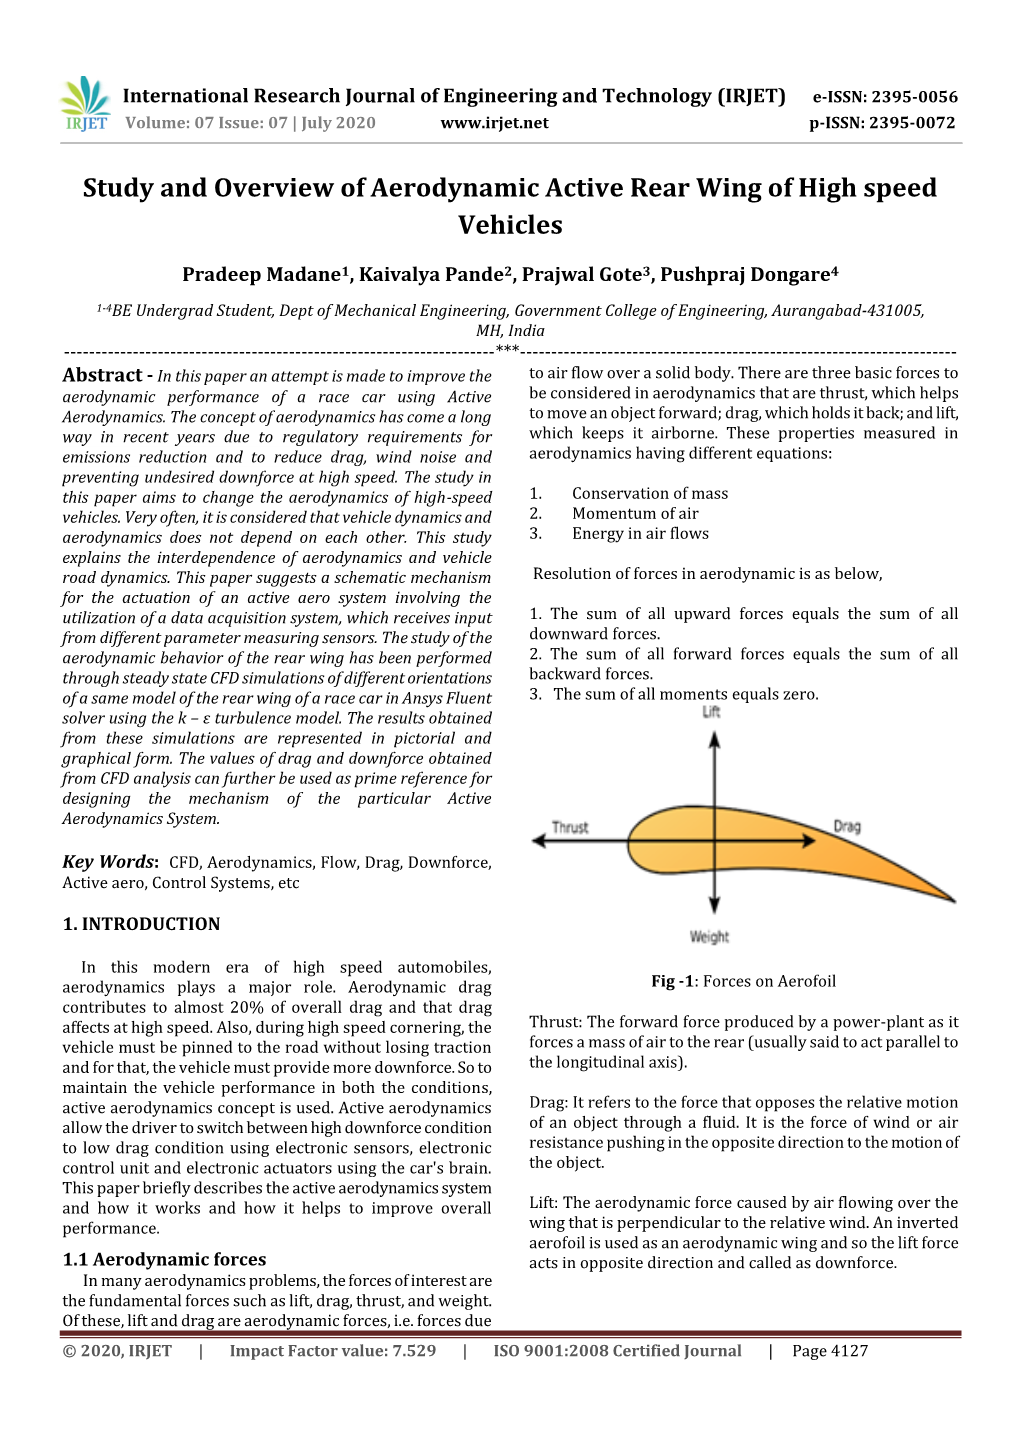 Study and Overview of Aerodynamic Active Rear Wing of High Speed Vehicles